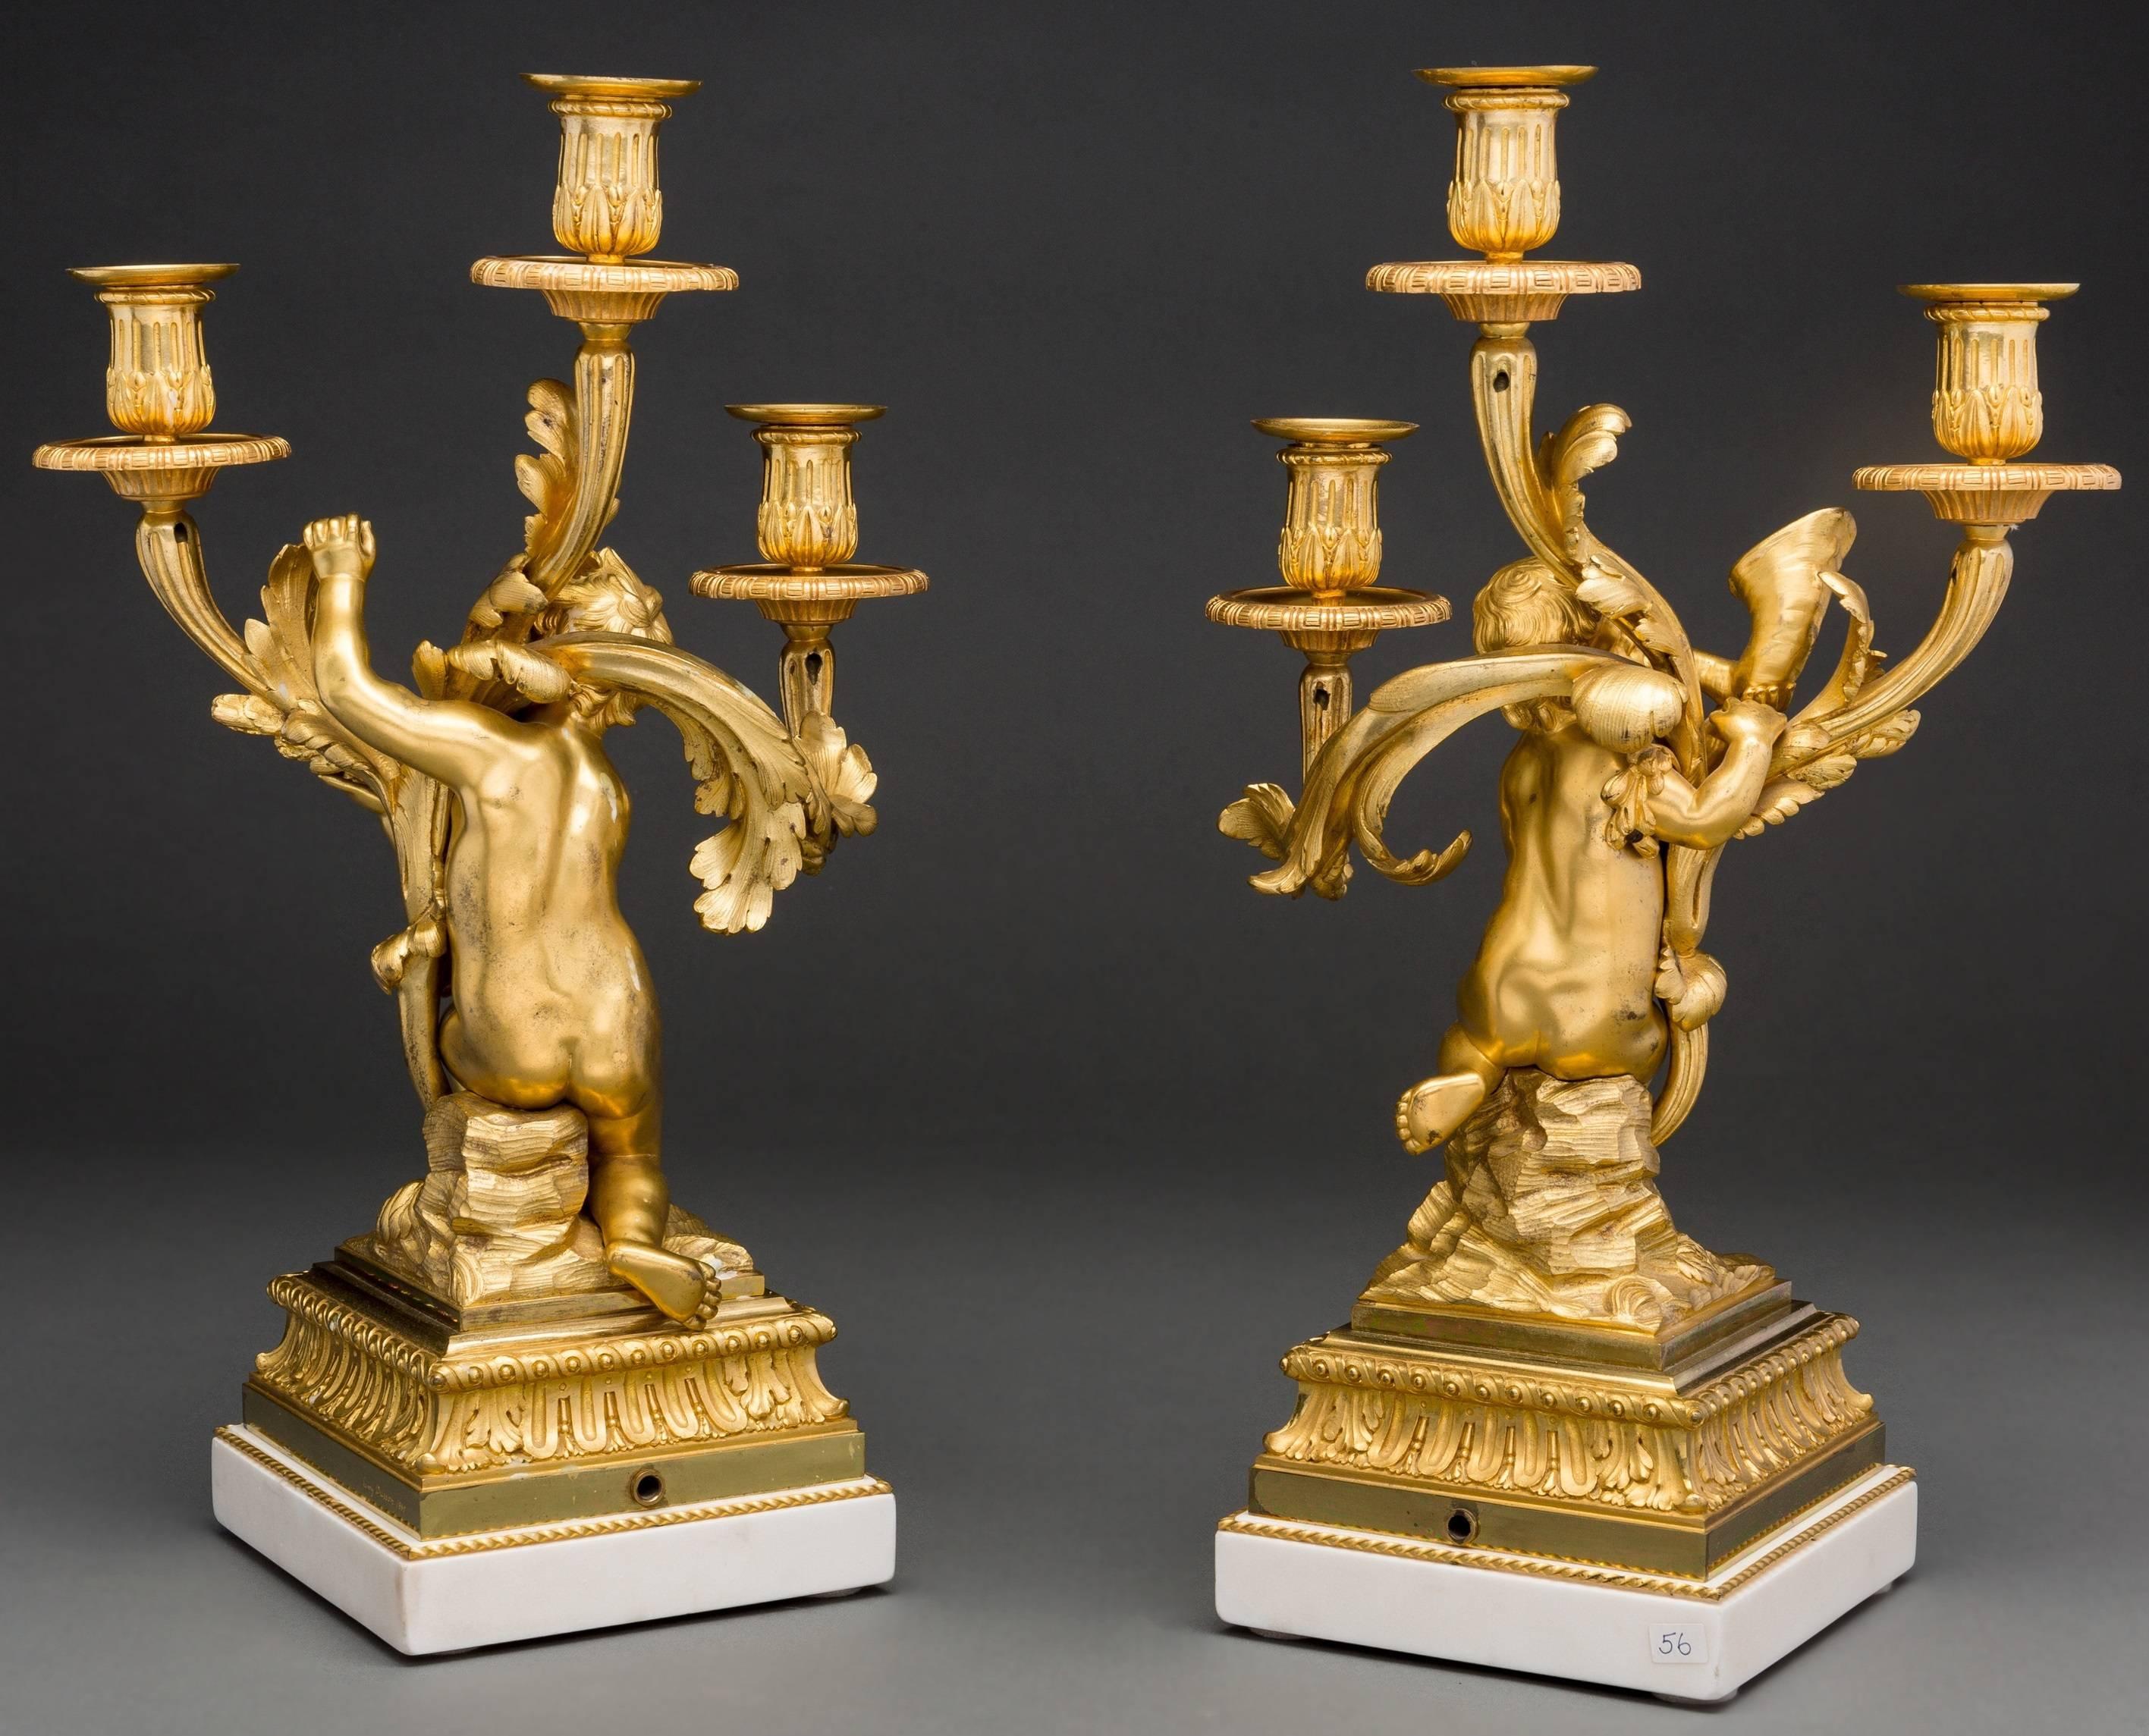 Pair of finest quality French 19 century Louis XVI style doré bronze and white marble cherub motif candelabras.
Signed: Henry Dasson.